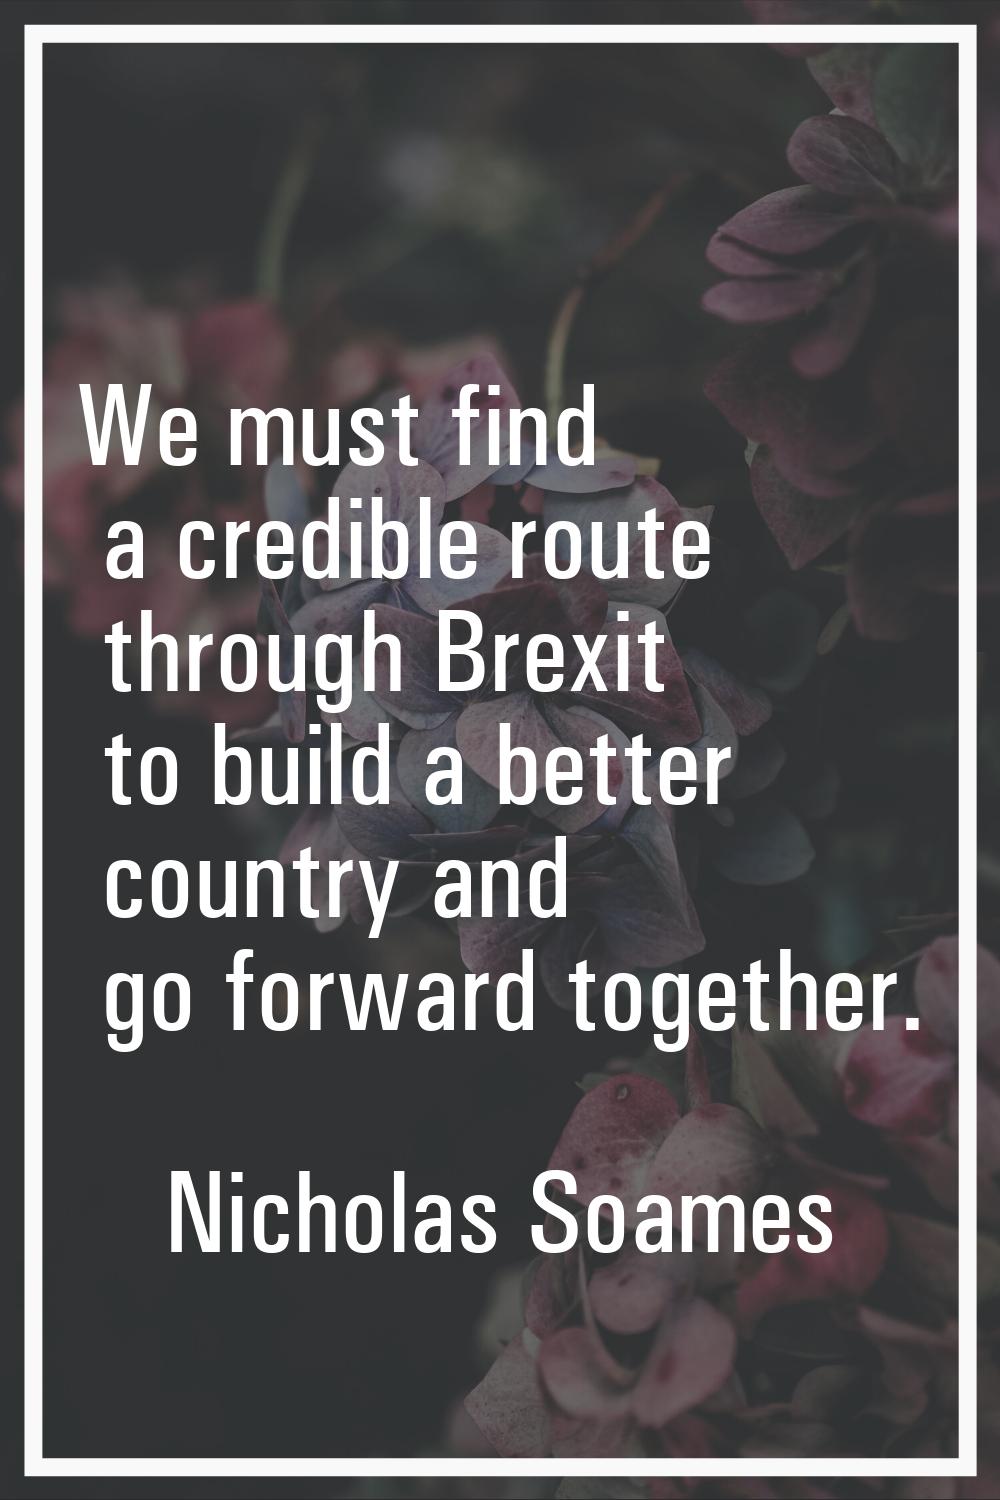 We must find a credible route through Brexit to build a better country and go forward together.